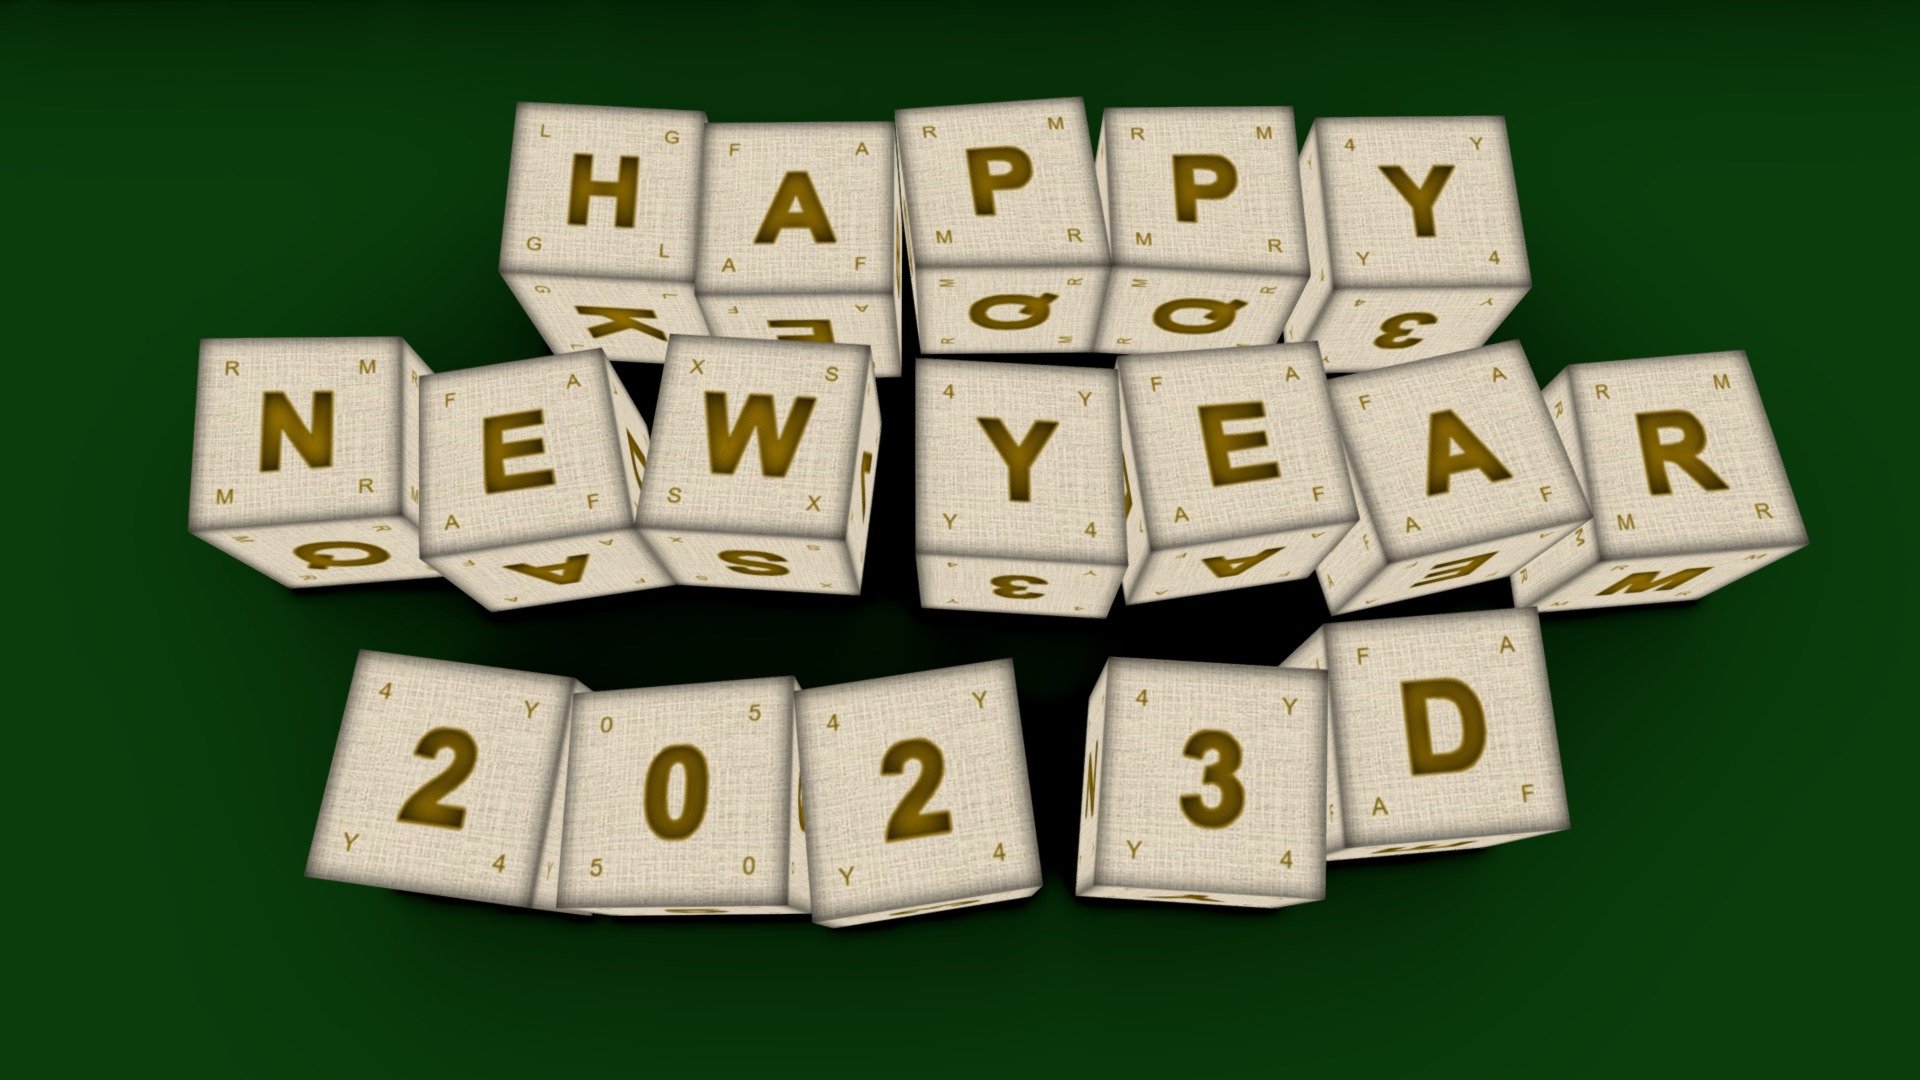 This is my little offer to wish everyone a Happy New Year, a very simple model of 6 different cubes, with 26 letters and 10 numbers.

Hope you enjoy it.

José Bronze - Alphanumeric Cubes - Download Free 3D model by Jose Bronze (@pinceladas3d) 3d model